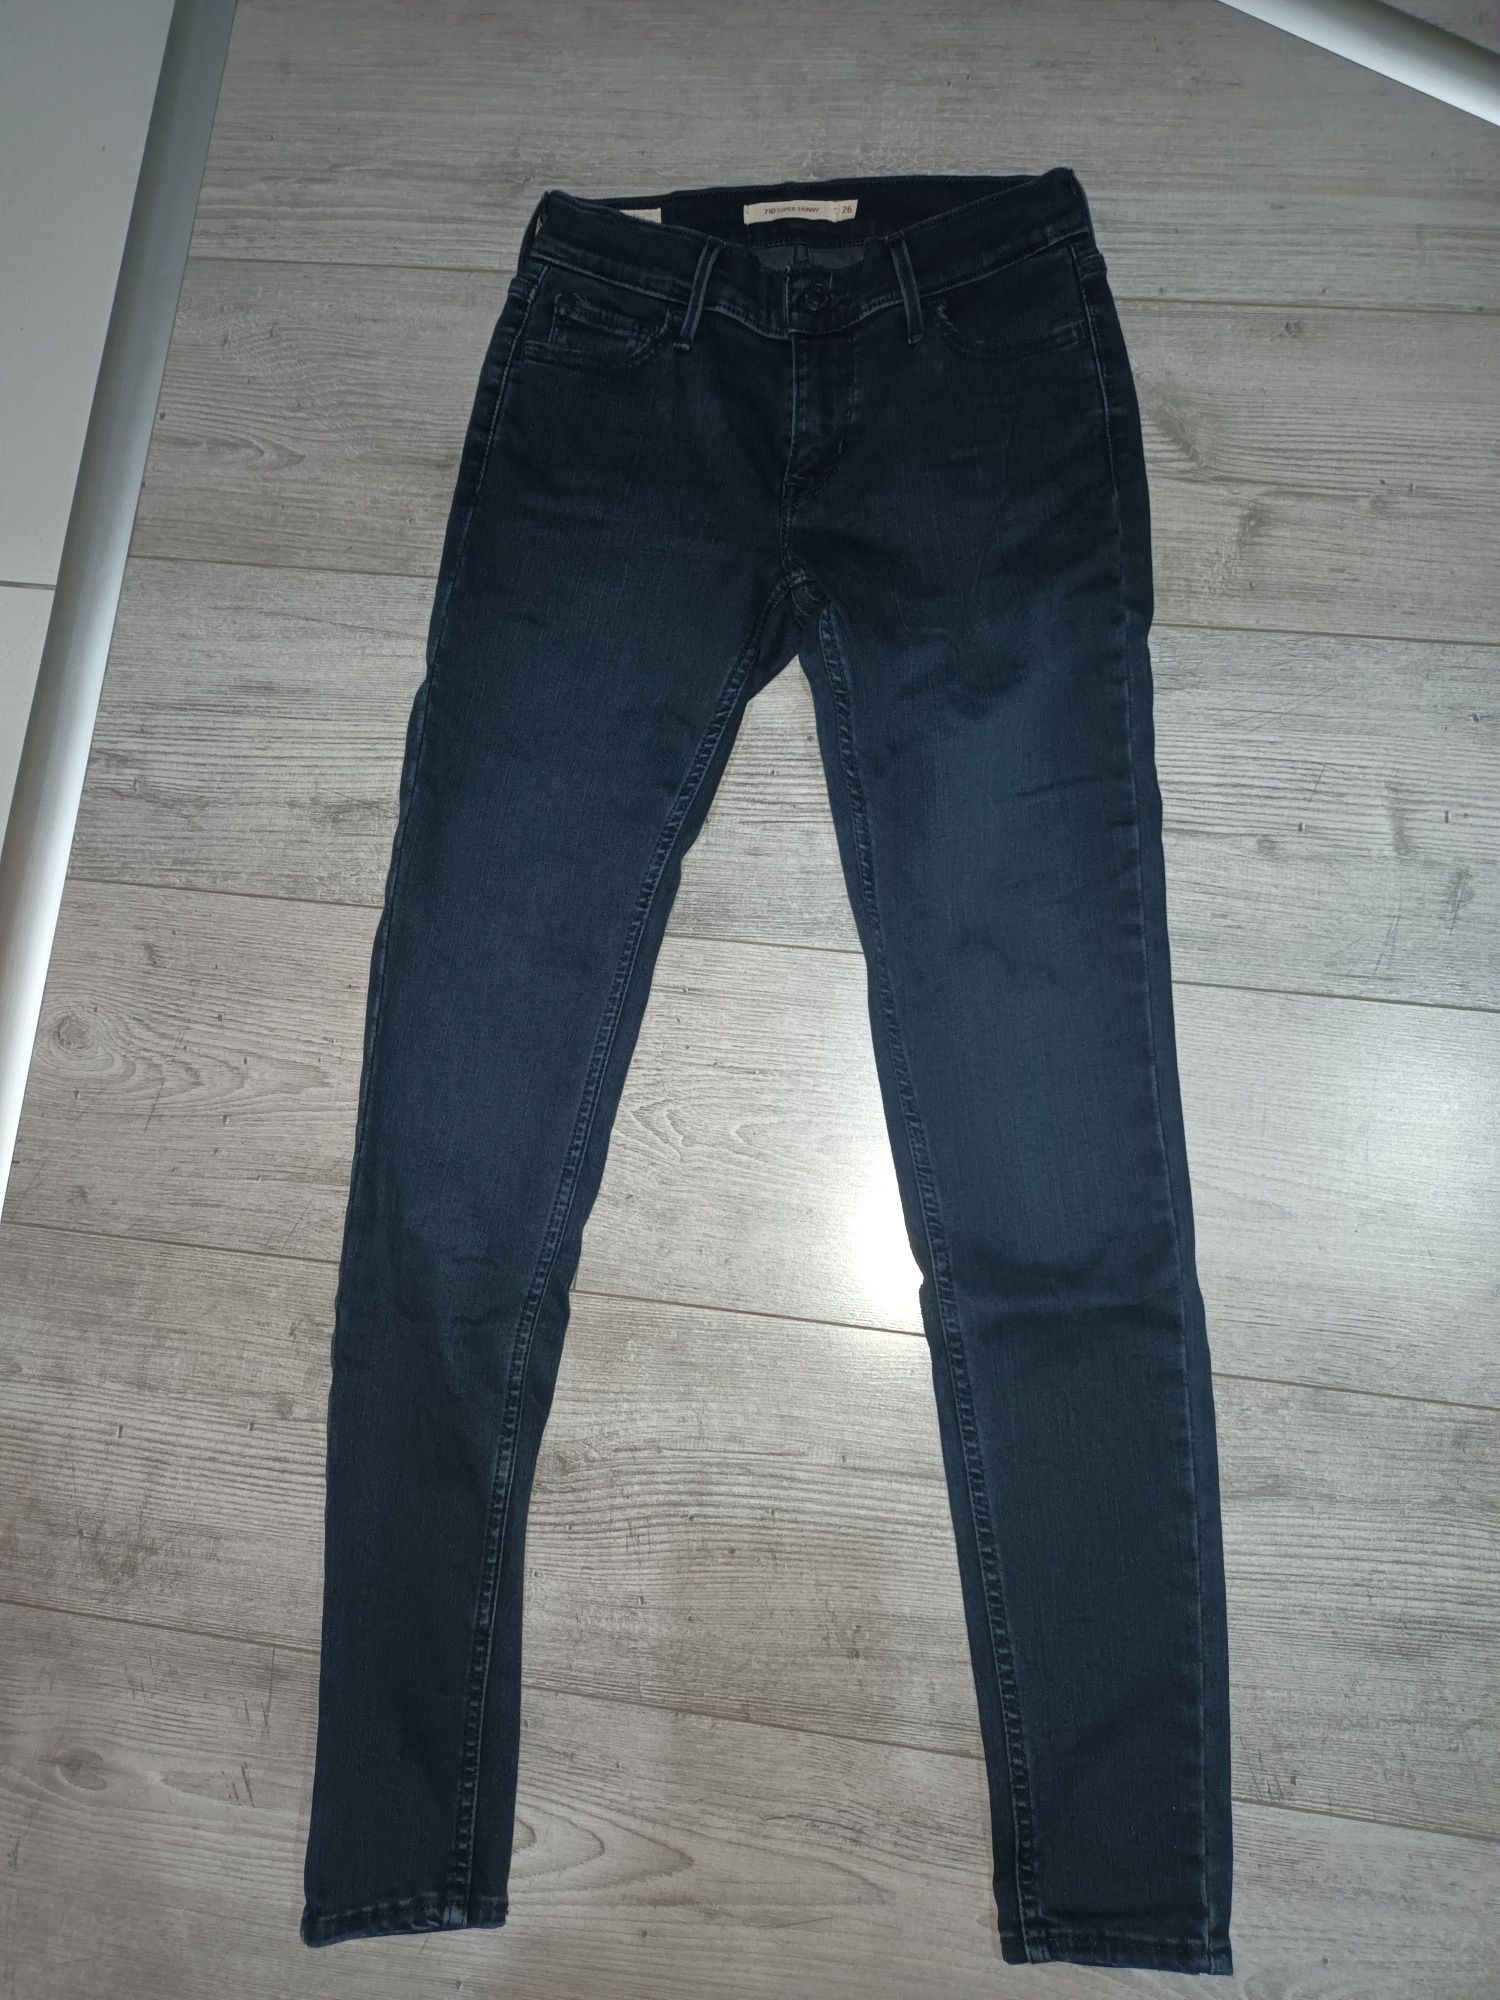 Jeansy Levis super skinny R 26